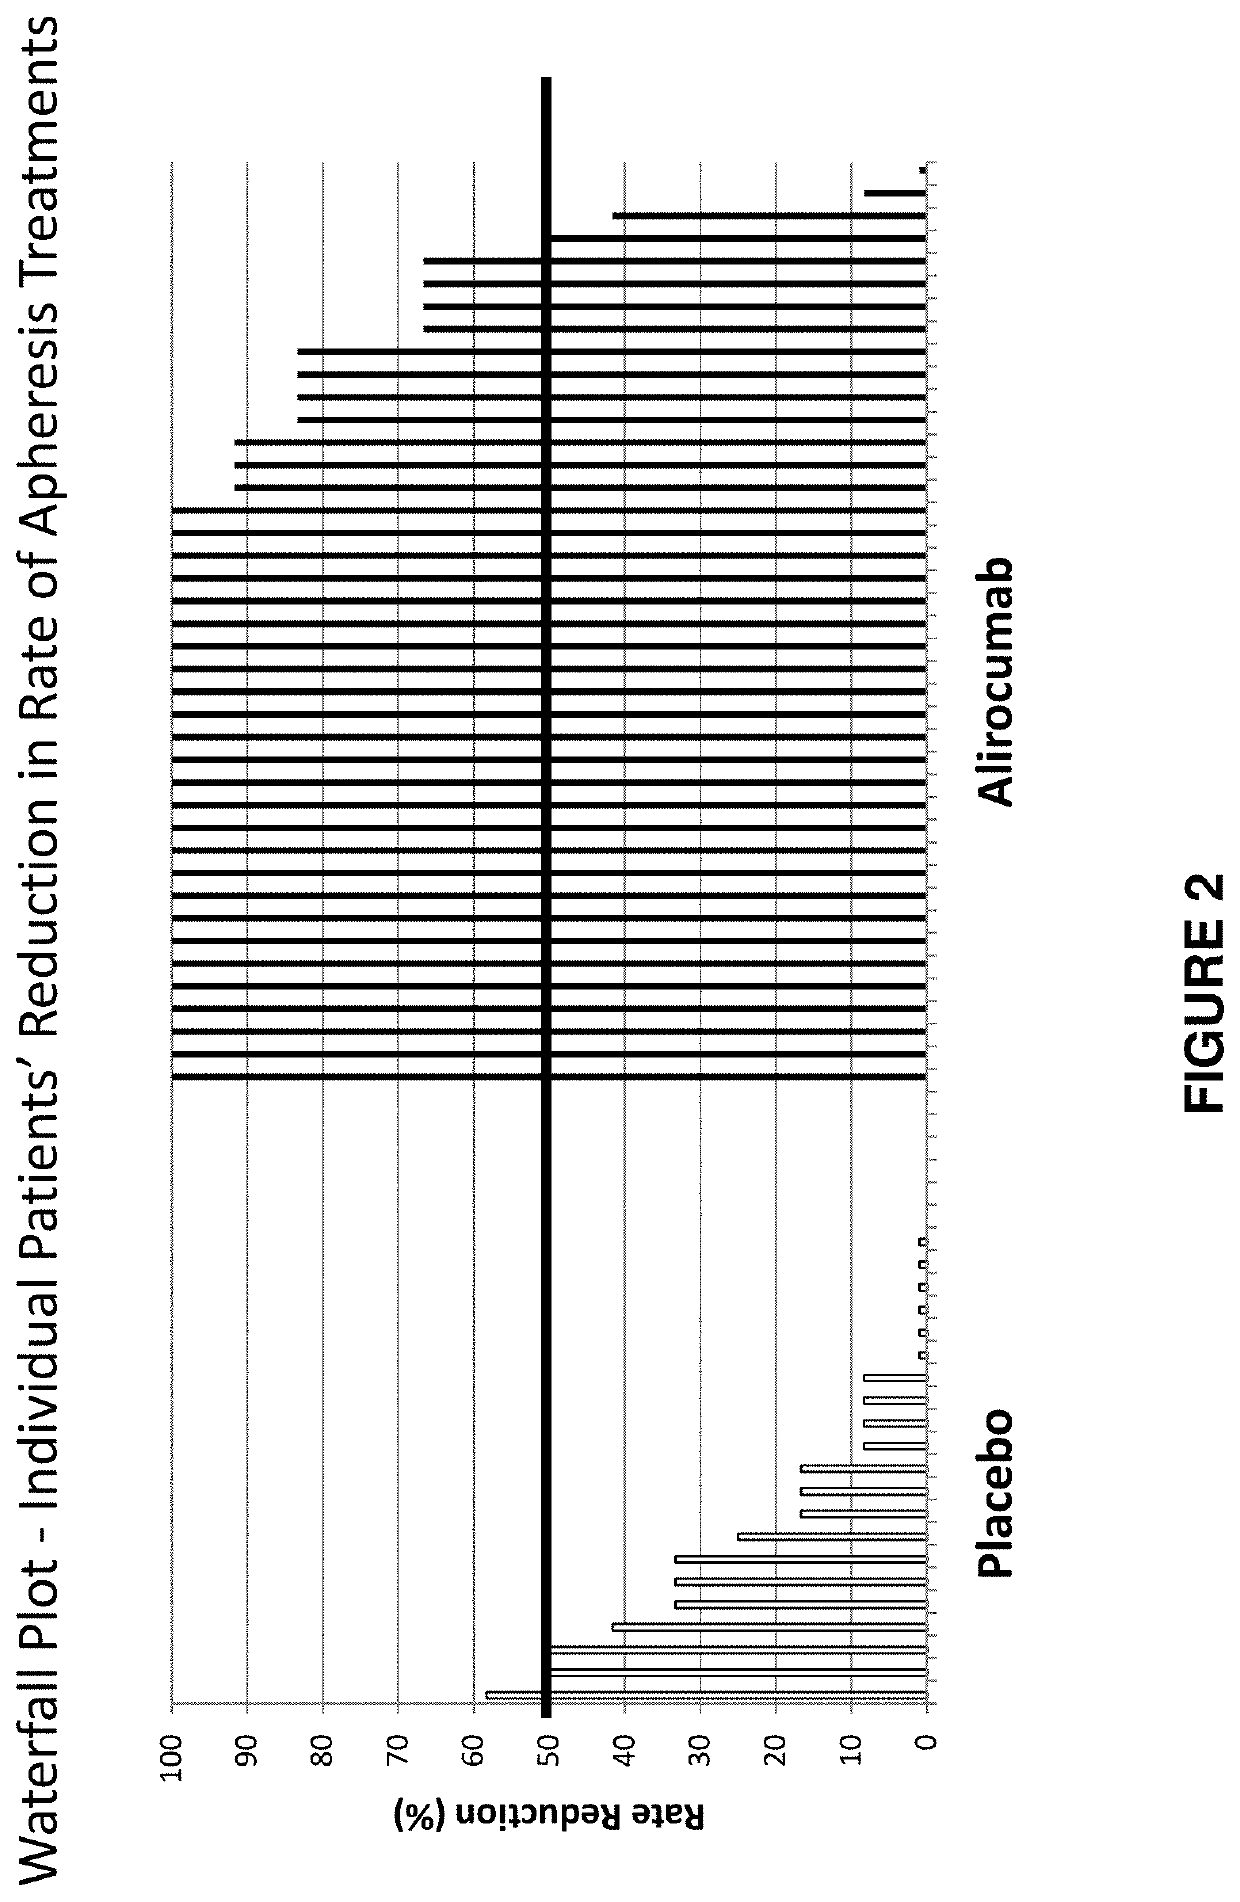 Methods for reducing or eliminating the need for lipoprotein apheresis in patients with hyperlipidemia by administering alirocumab